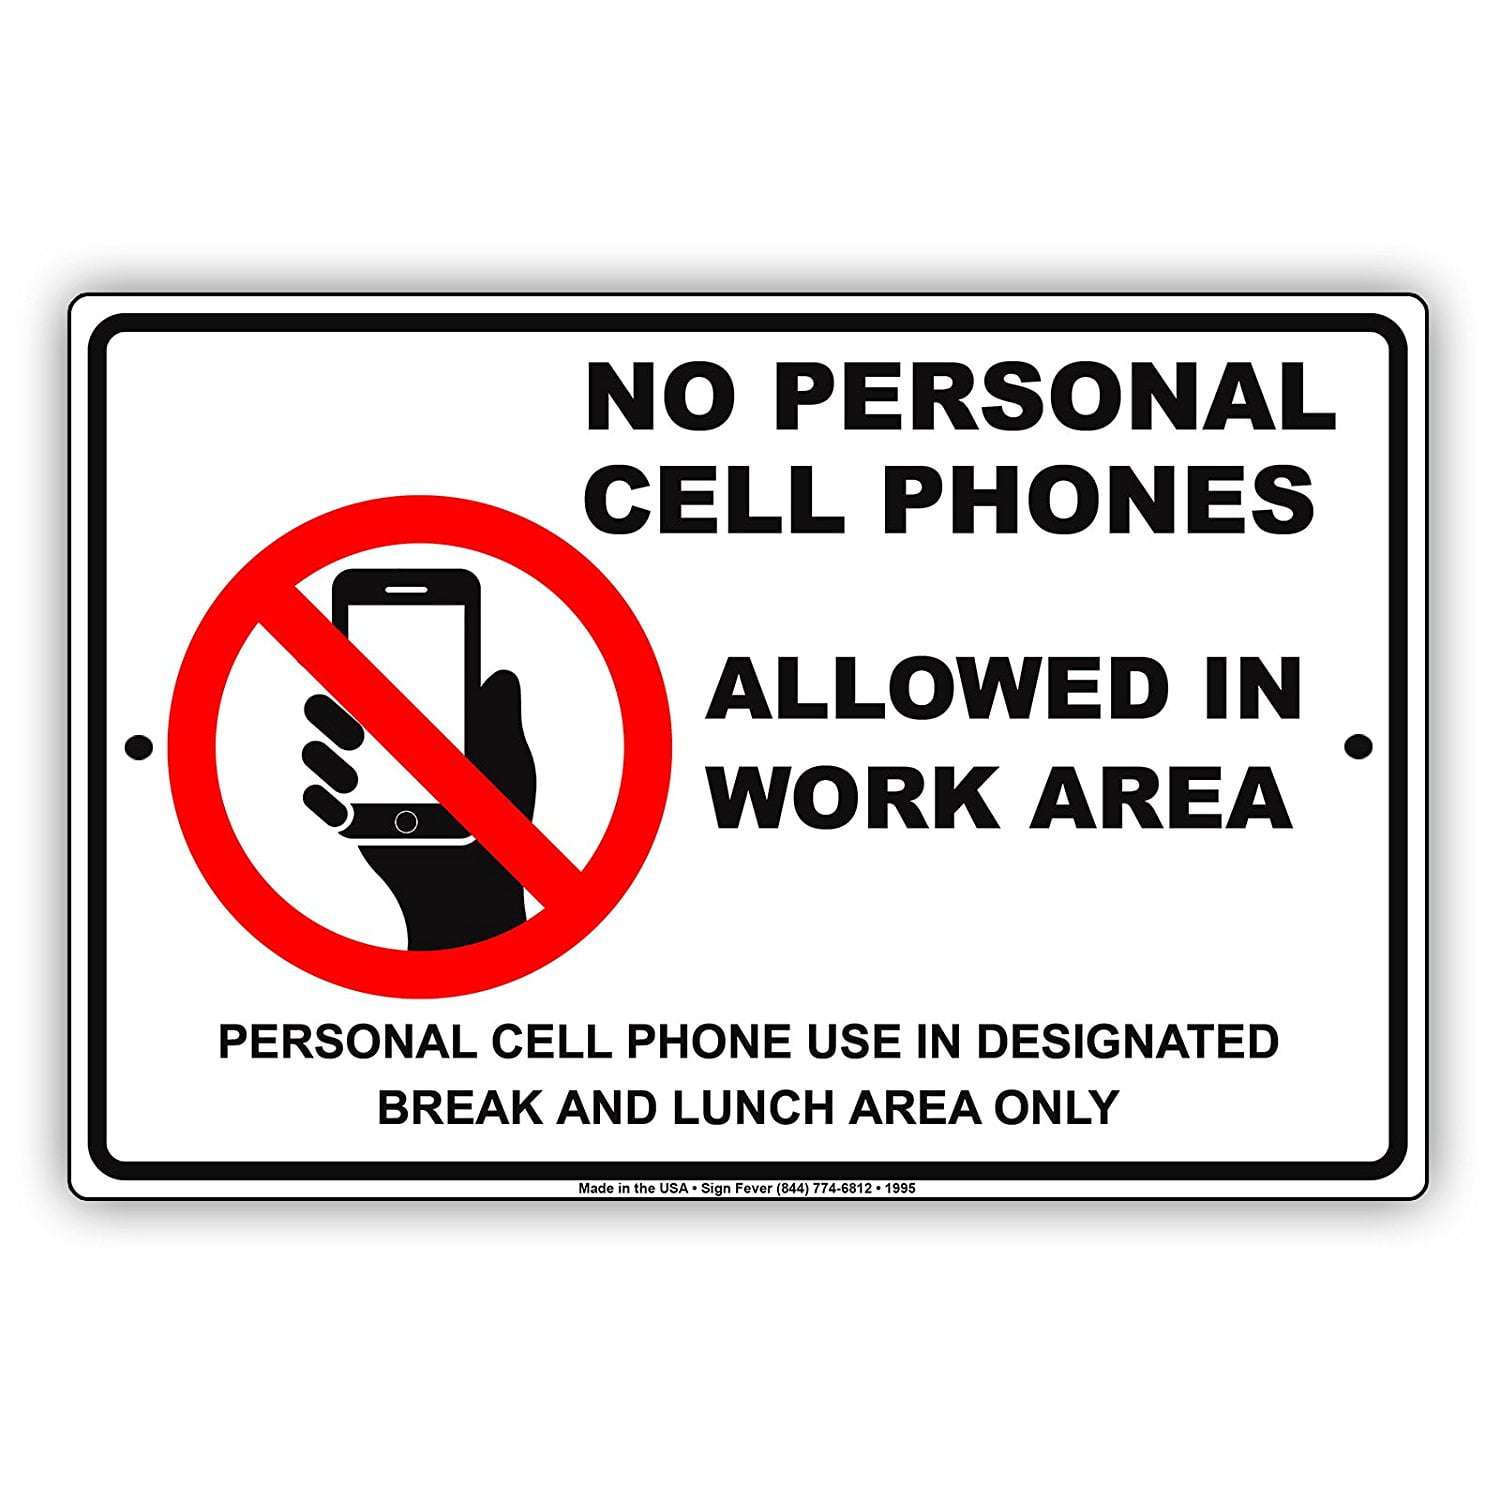 Construction Personnel Only Warning Care Safety Alert Notice Aluminum Metal Sign